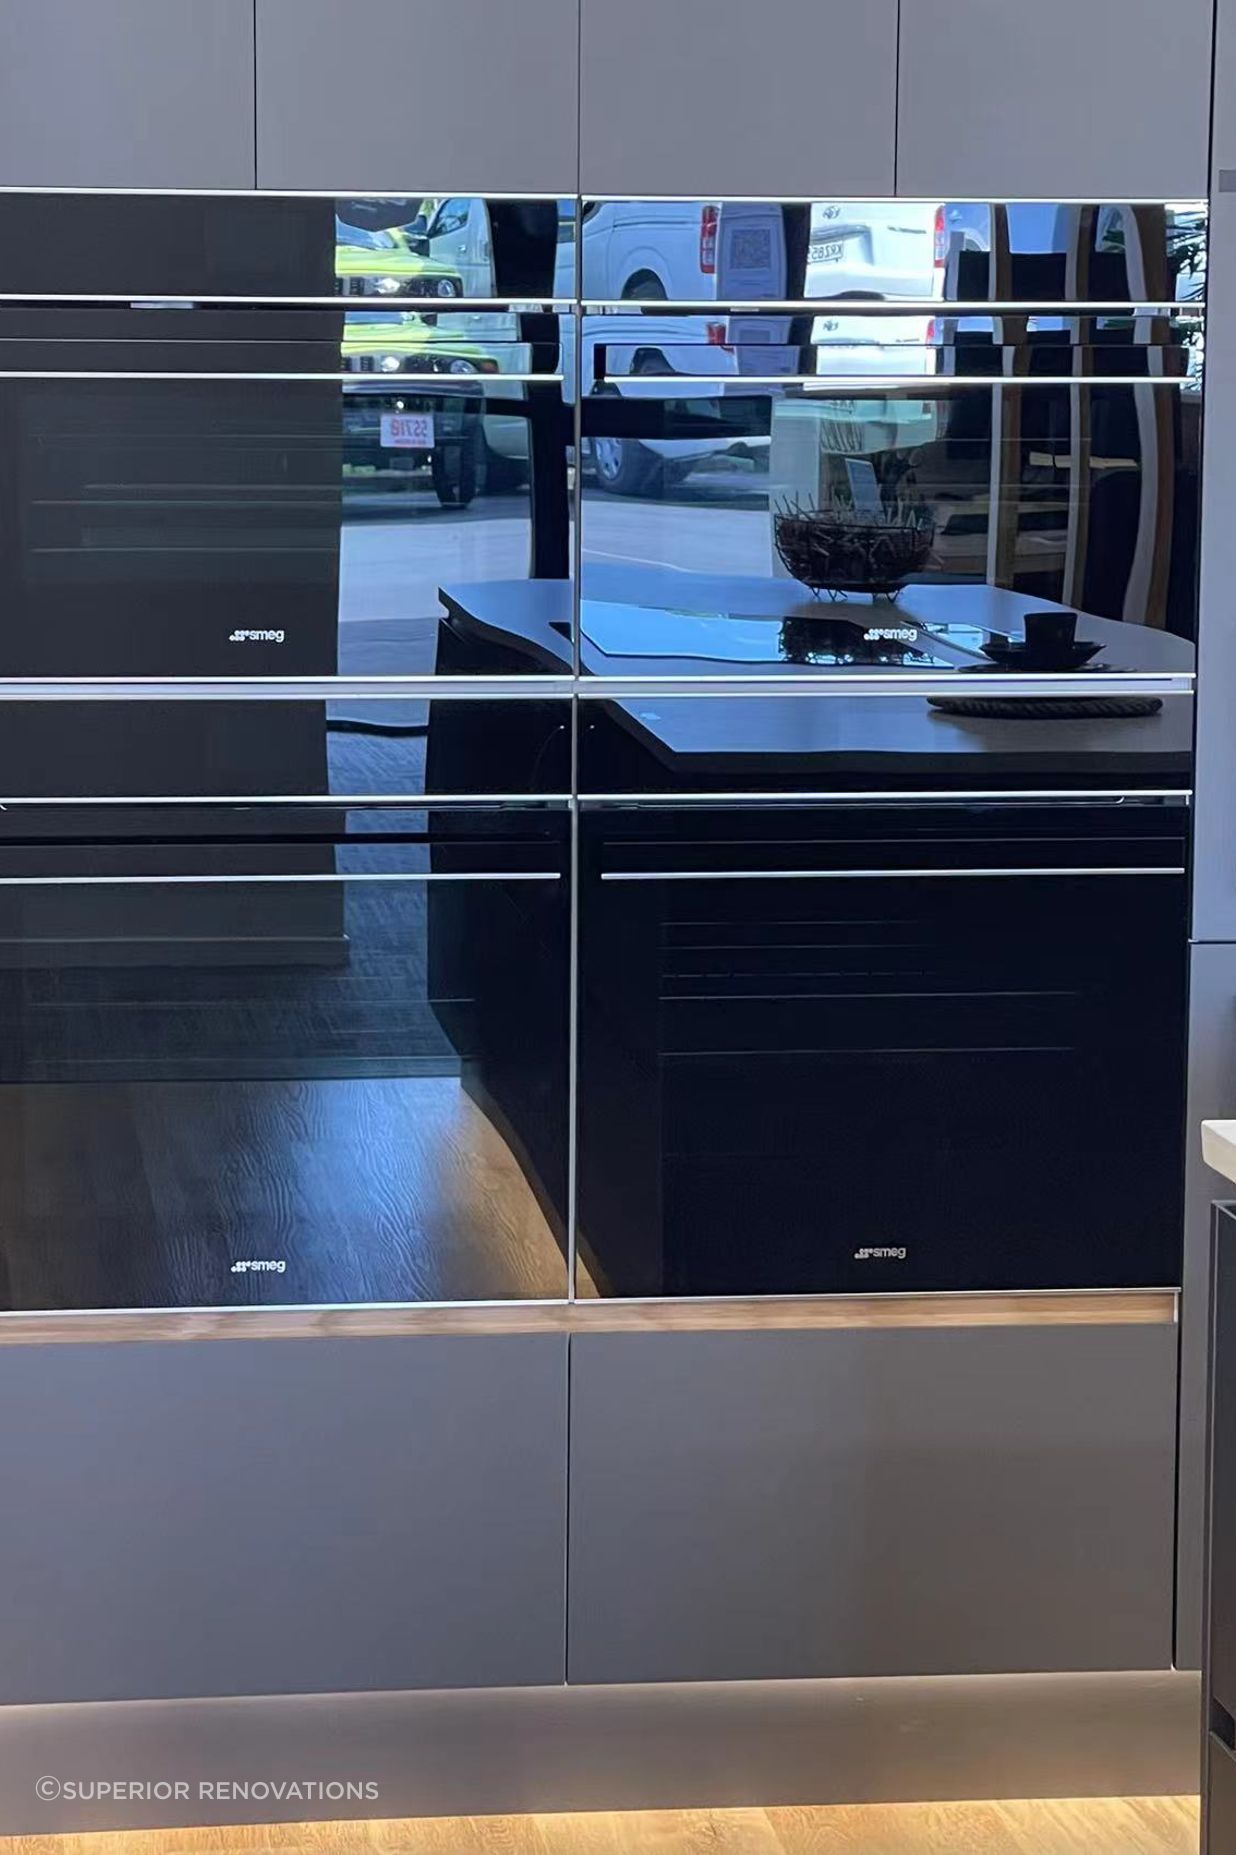 In built 2 Ovens, Microwave, and Steamer Oven from SMEG – Can be seen in our kitchen showroom in Auckland